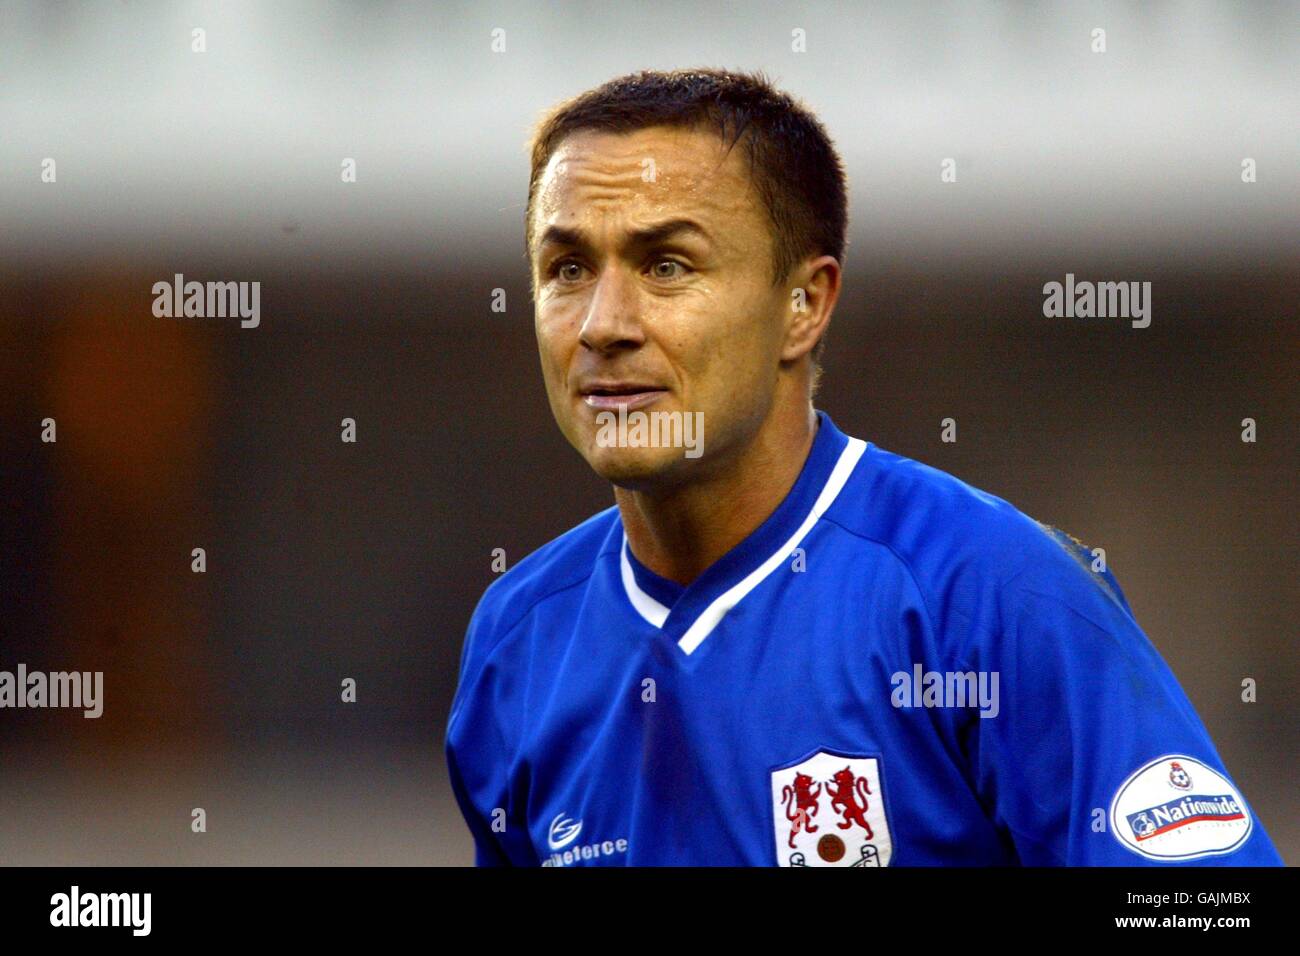 Fußball - Nationwide League Division One - Millwall / Leicester City. Dennis Wise, Millwall Stockfoto